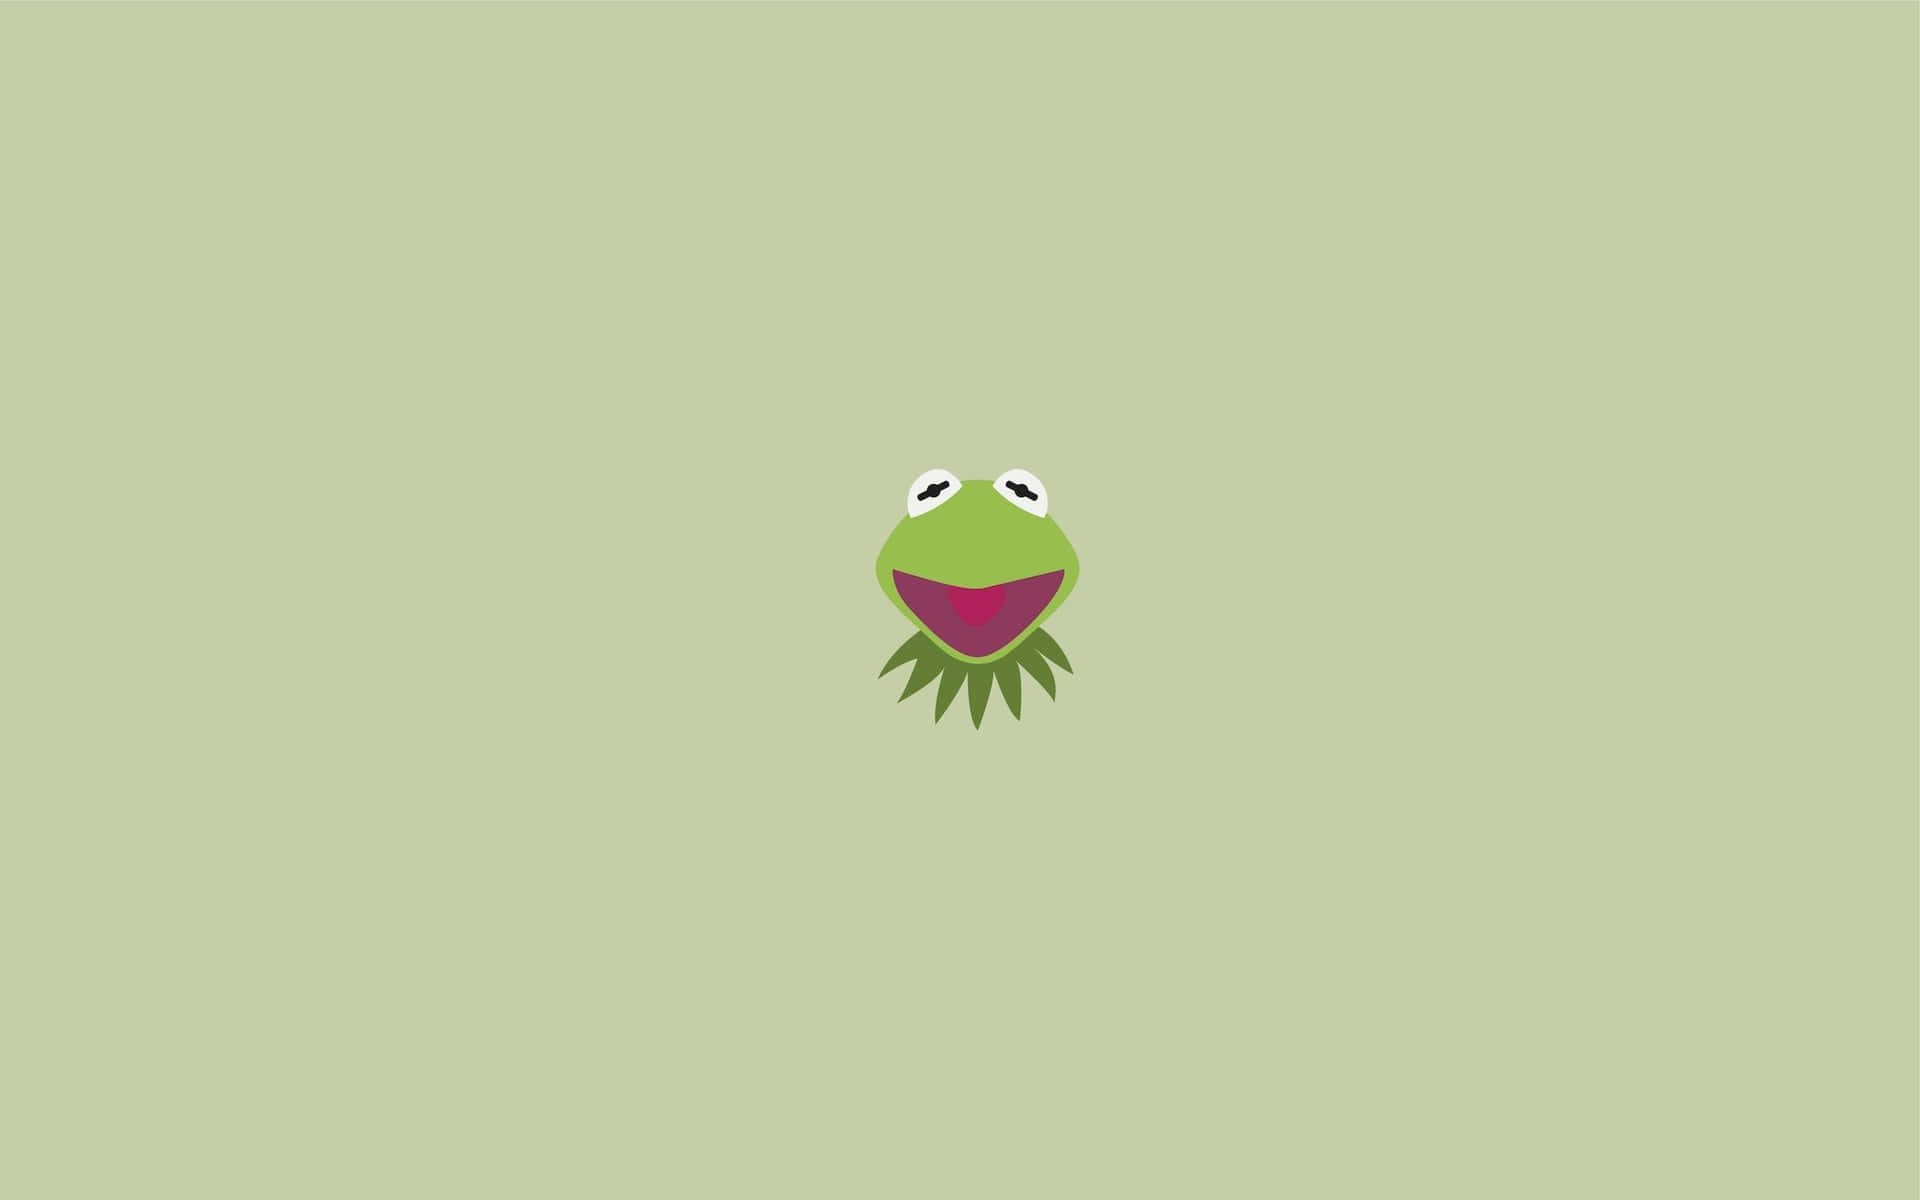 A Tranquil Moment with Aesthetic Frog Wallpaper